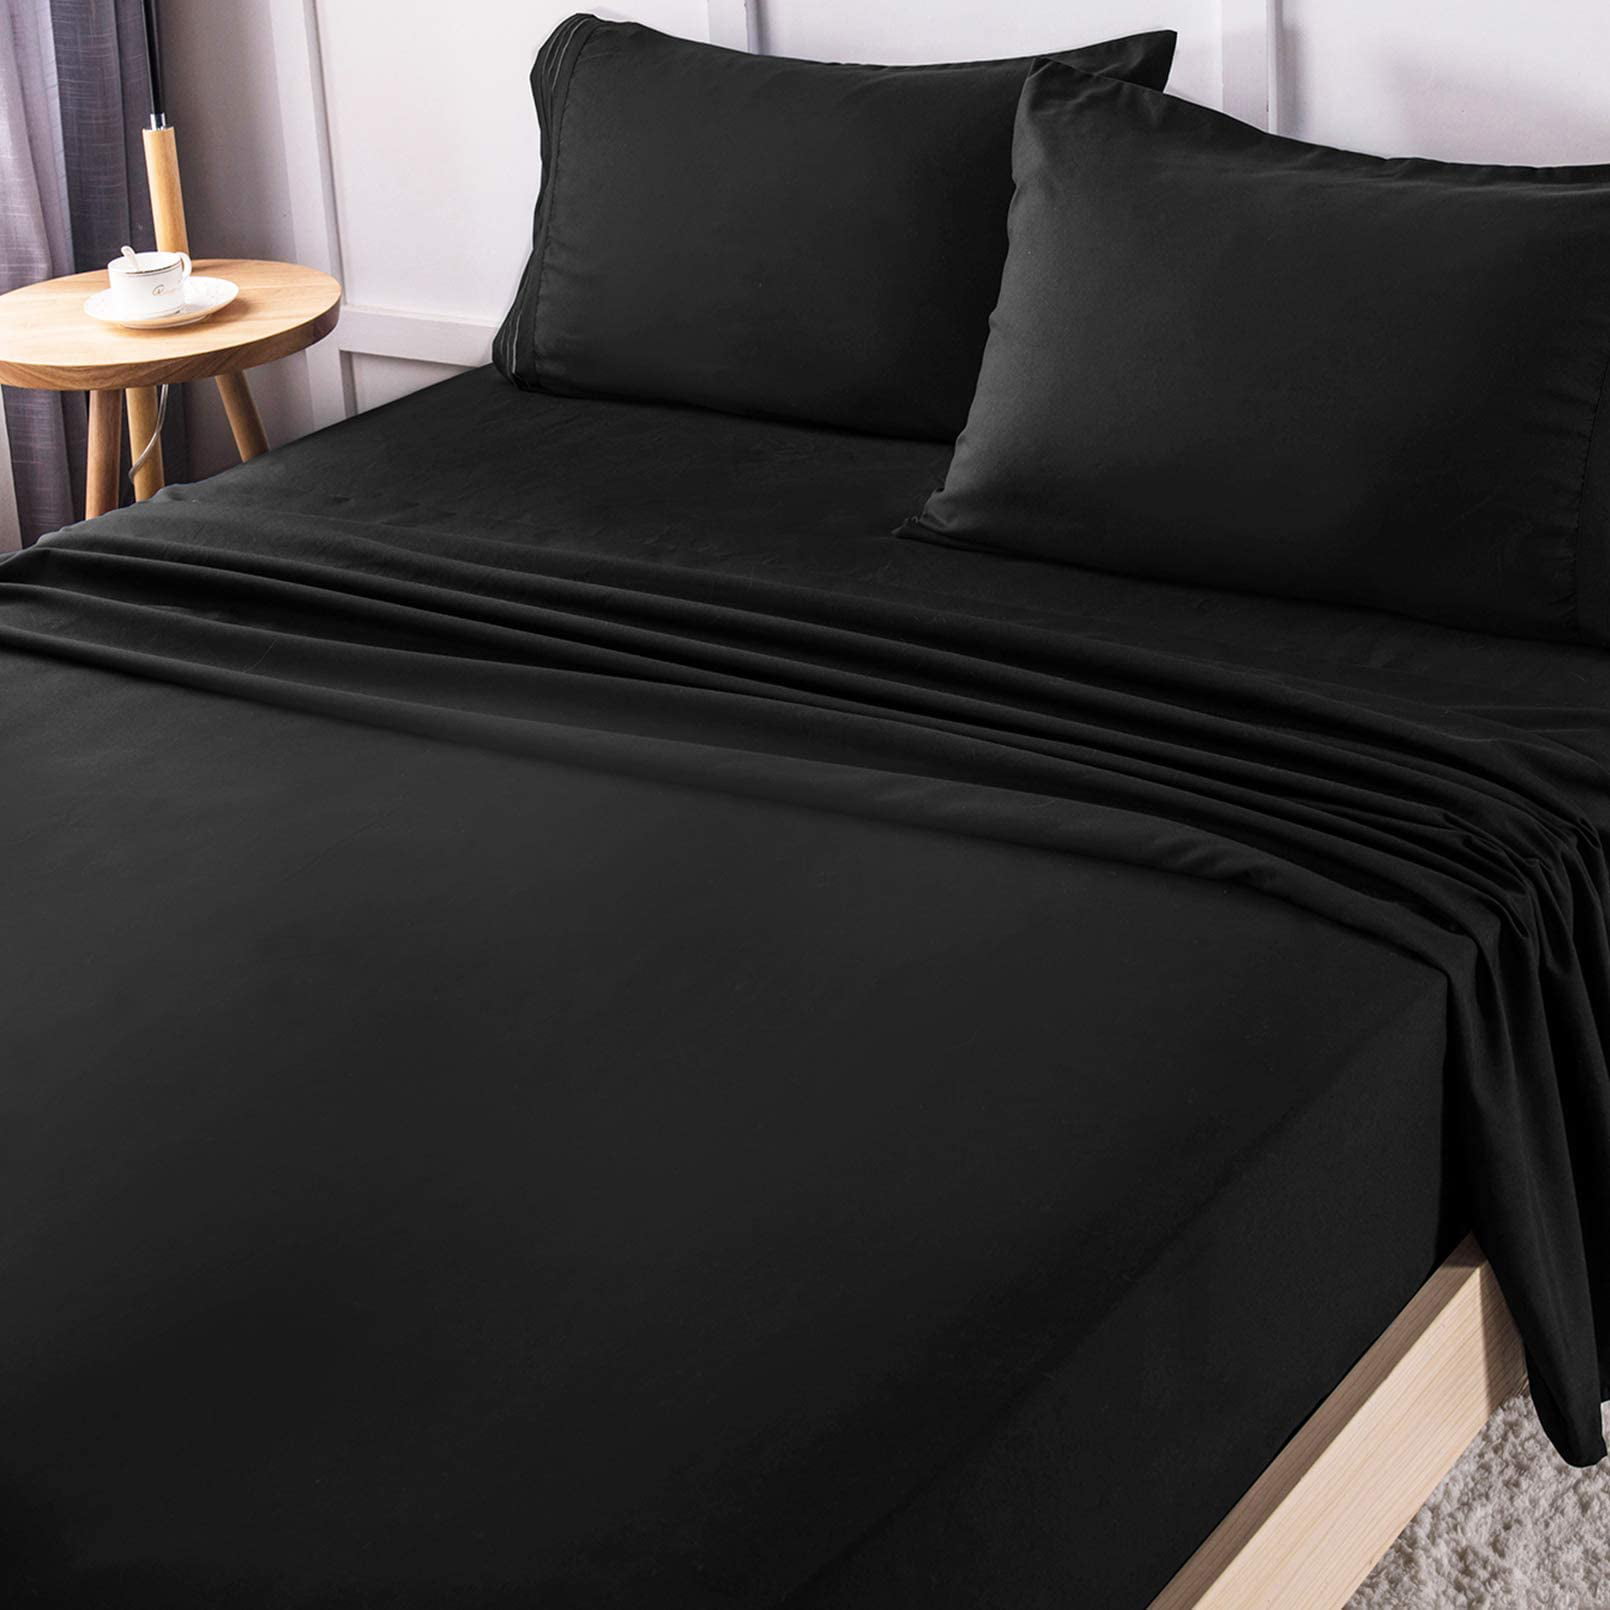 Stain Resistant Fade Black, 2 Pillowcases King Hypoallergenic SONORO KATE Luxury Pillowcase Set Brushed Microfiber 1800 Bedding Wrinkle